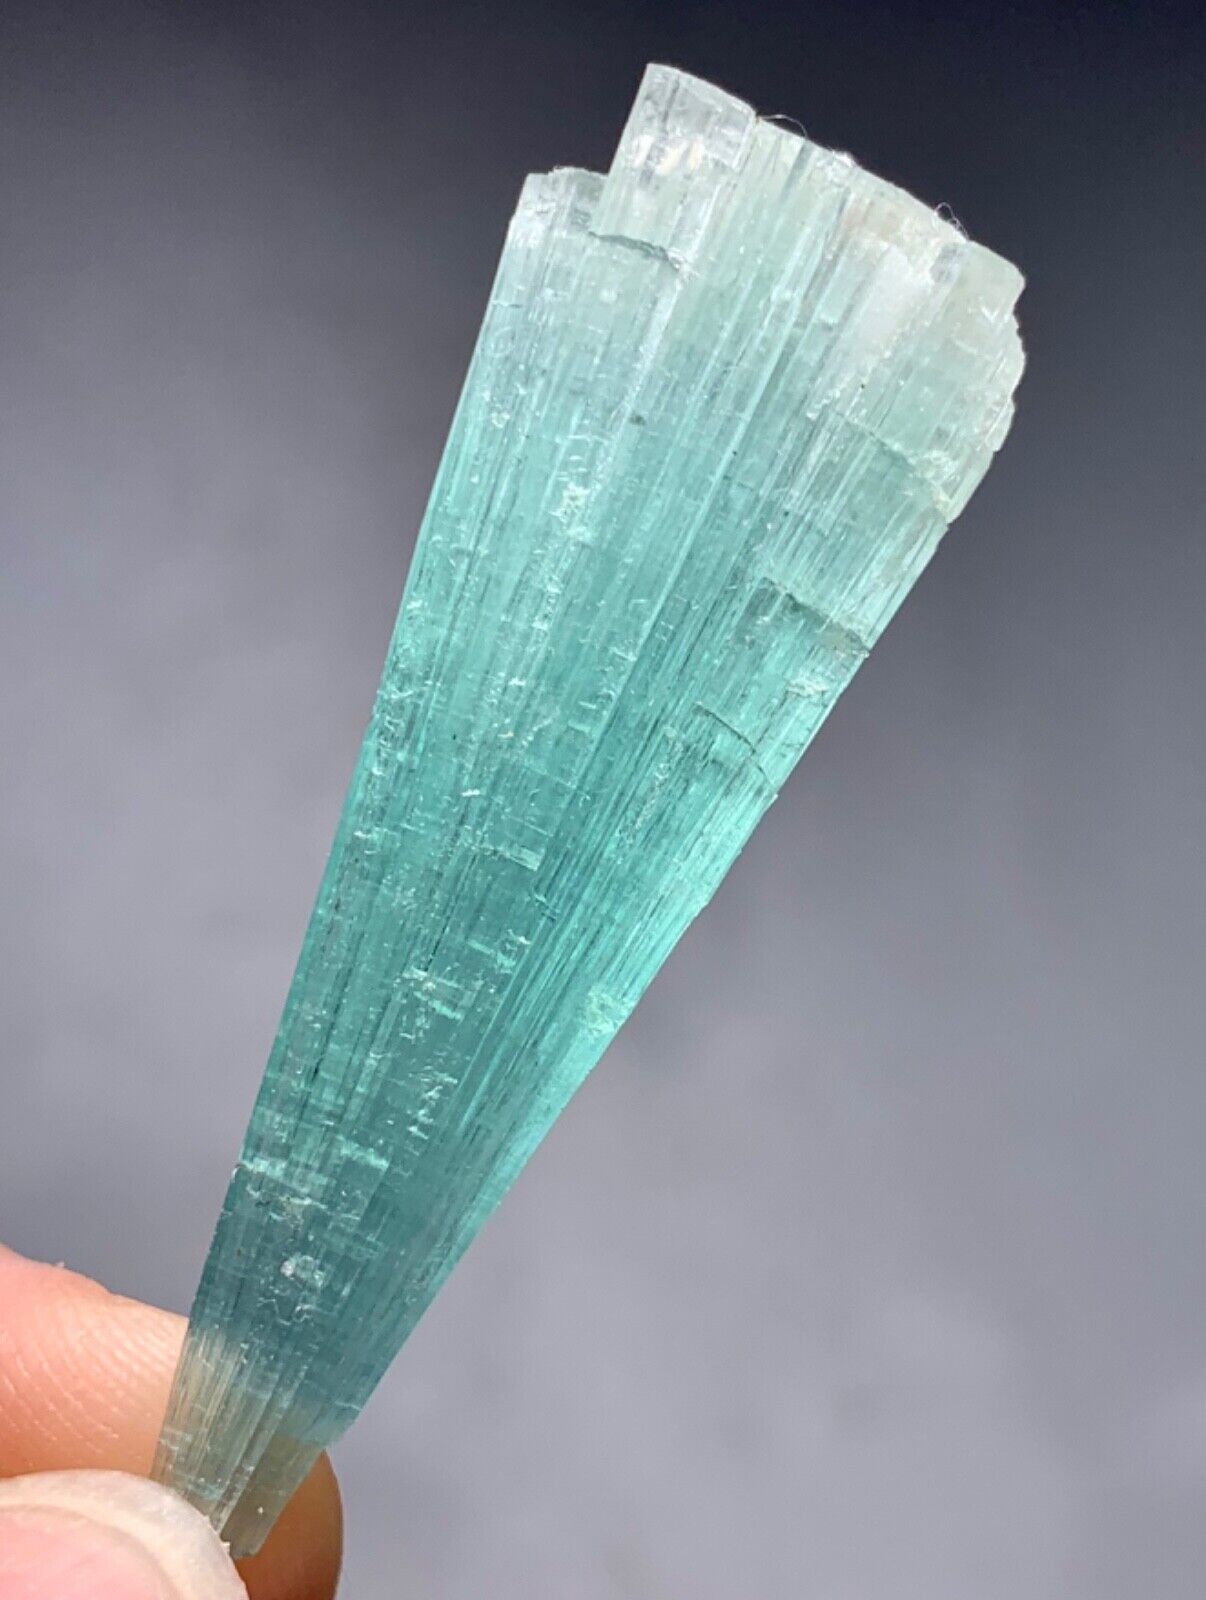 30 Carat Top Quality tourmaline crystal Specimen from Afghanistan